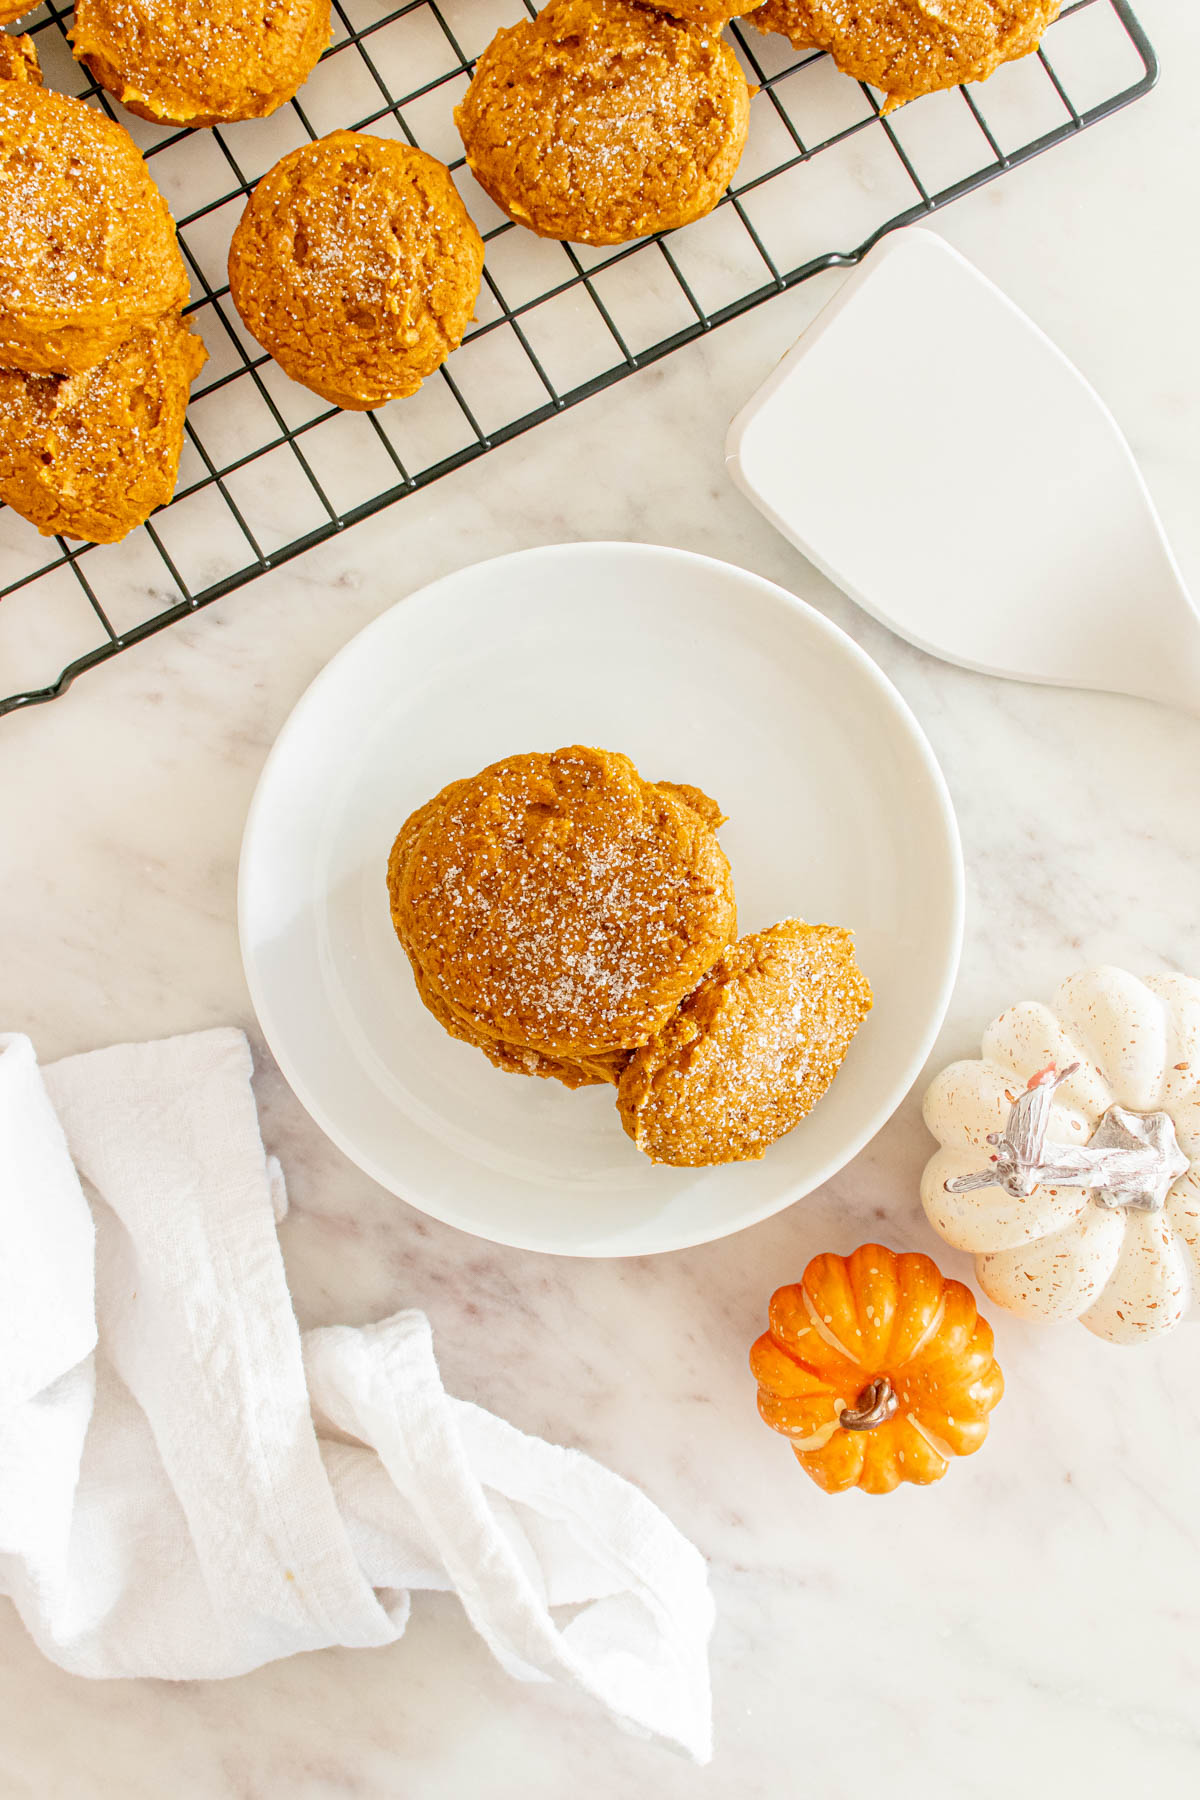 A plate of pumpkin cookies on a marble countertop.